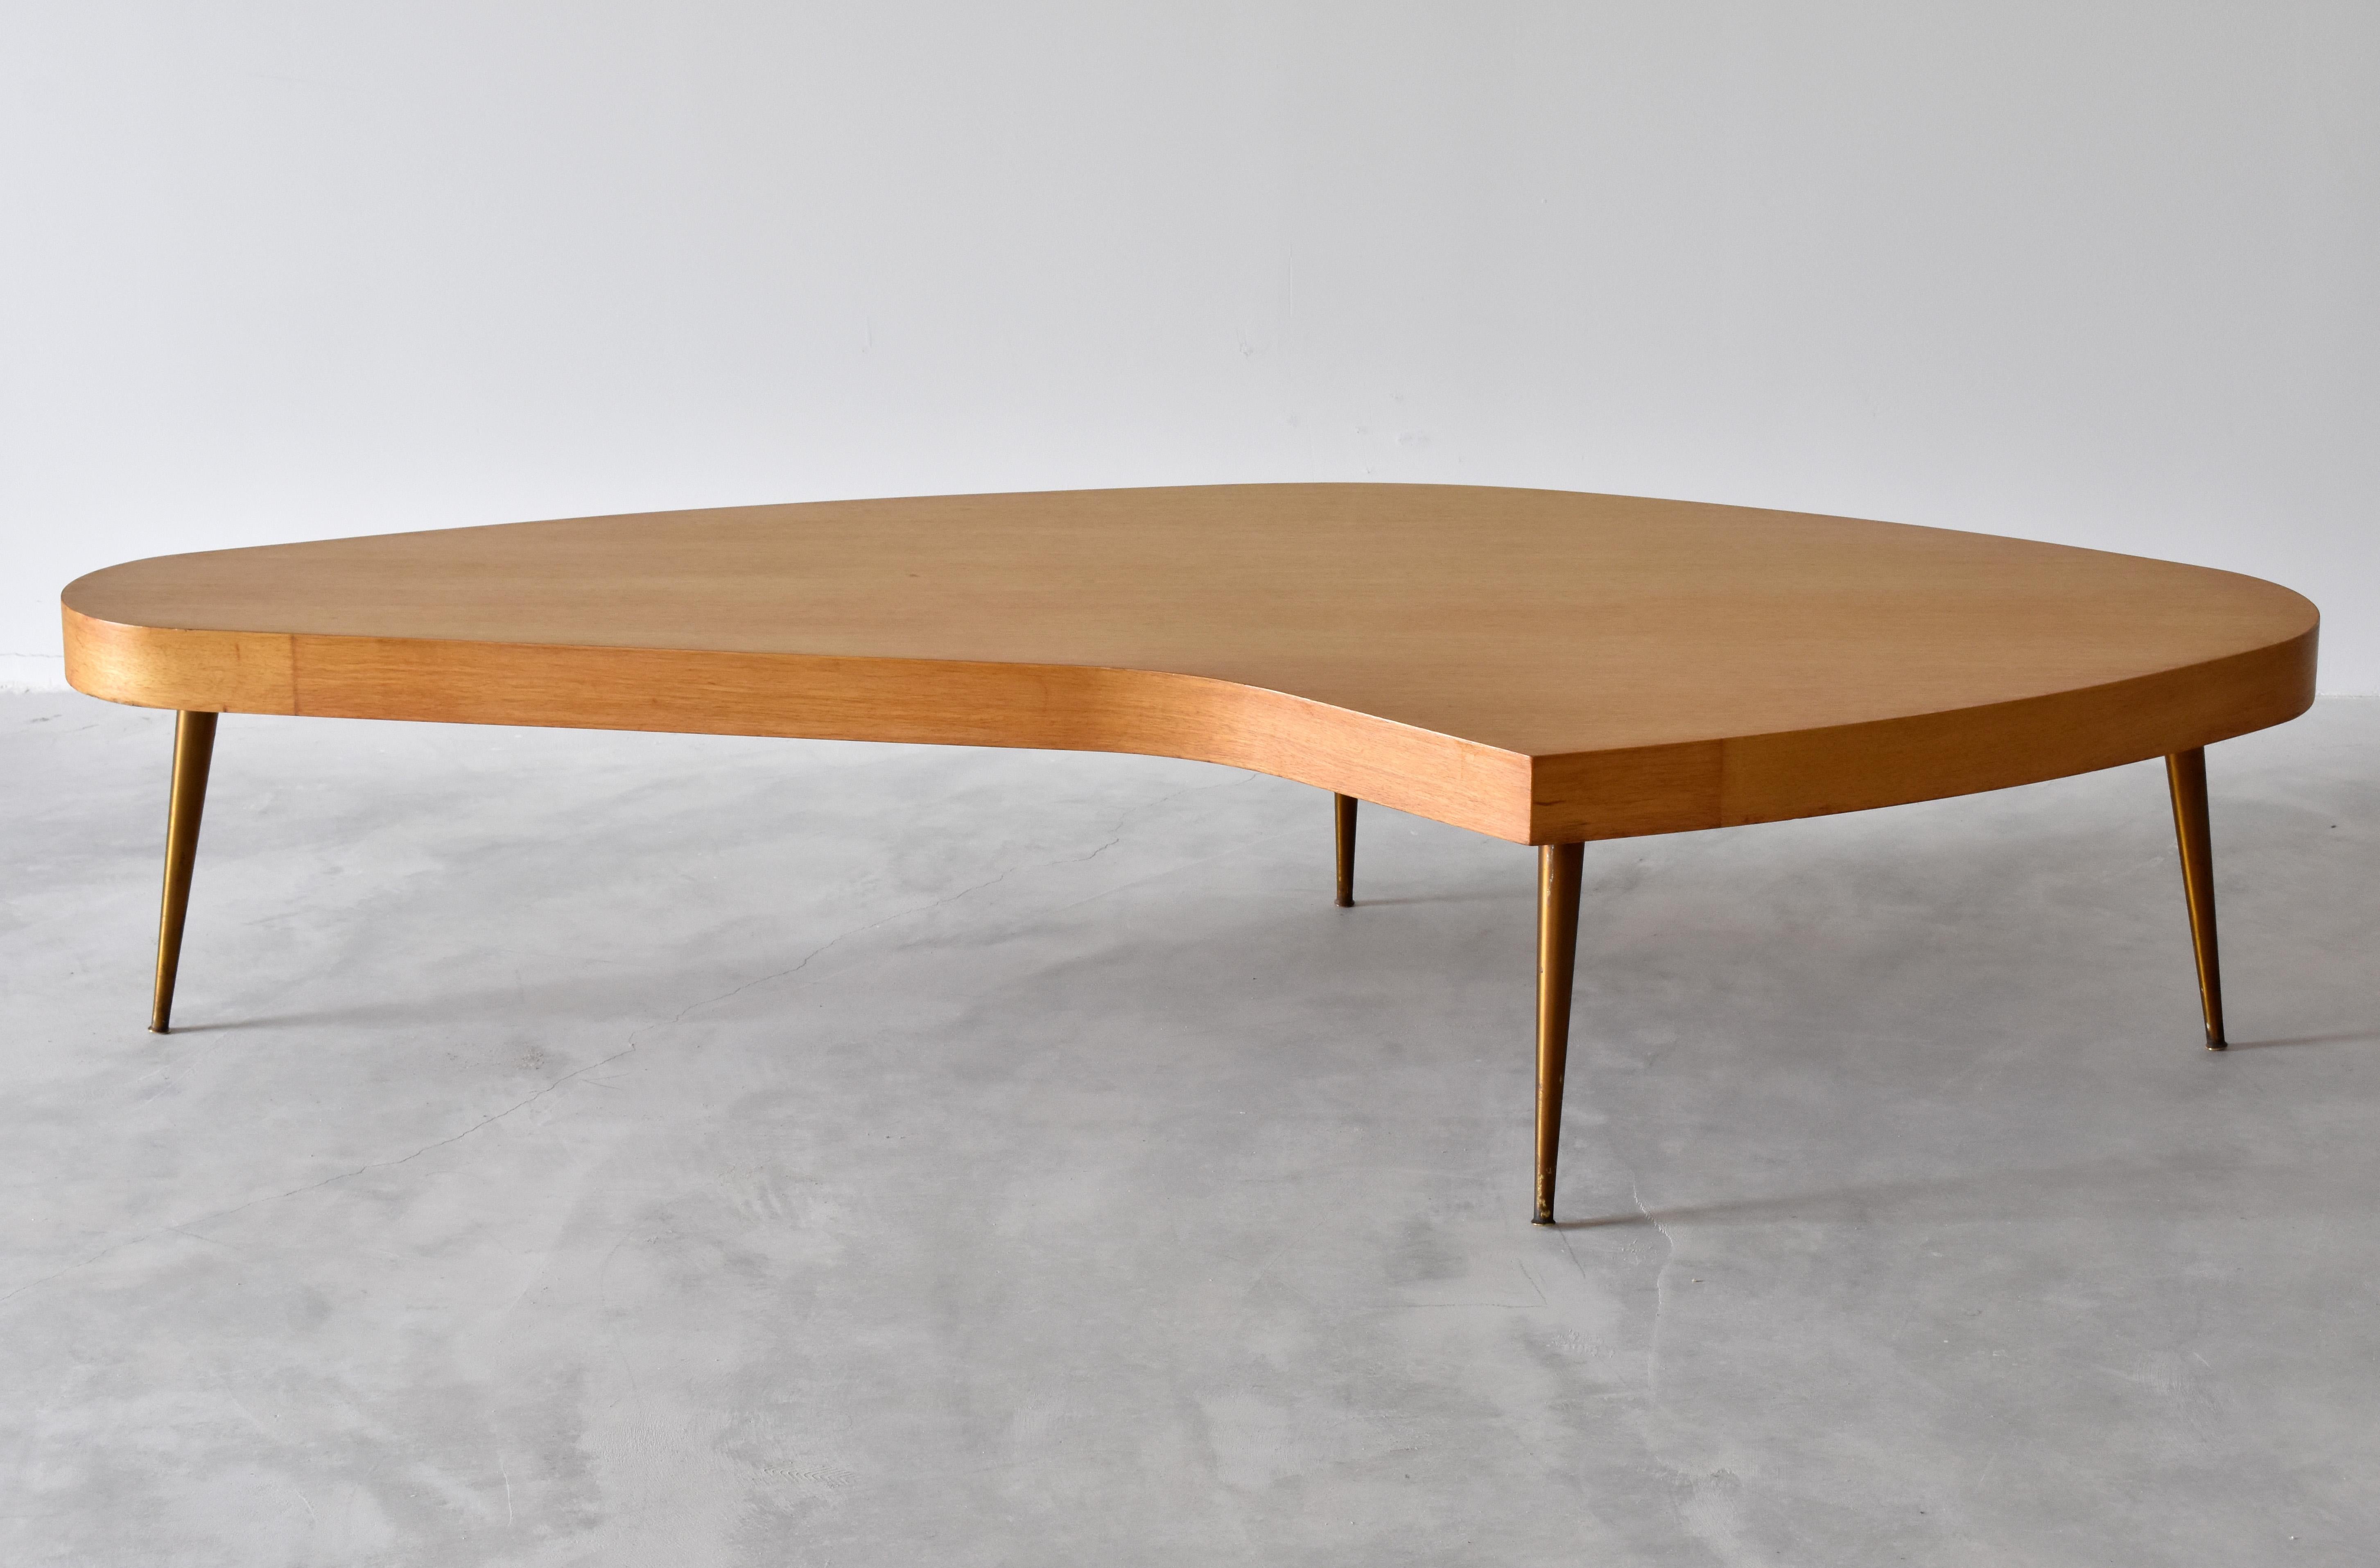 American Modernist Free-Form Coffee or Cocktail Table, Oak, Brass Legs, America, 1950s